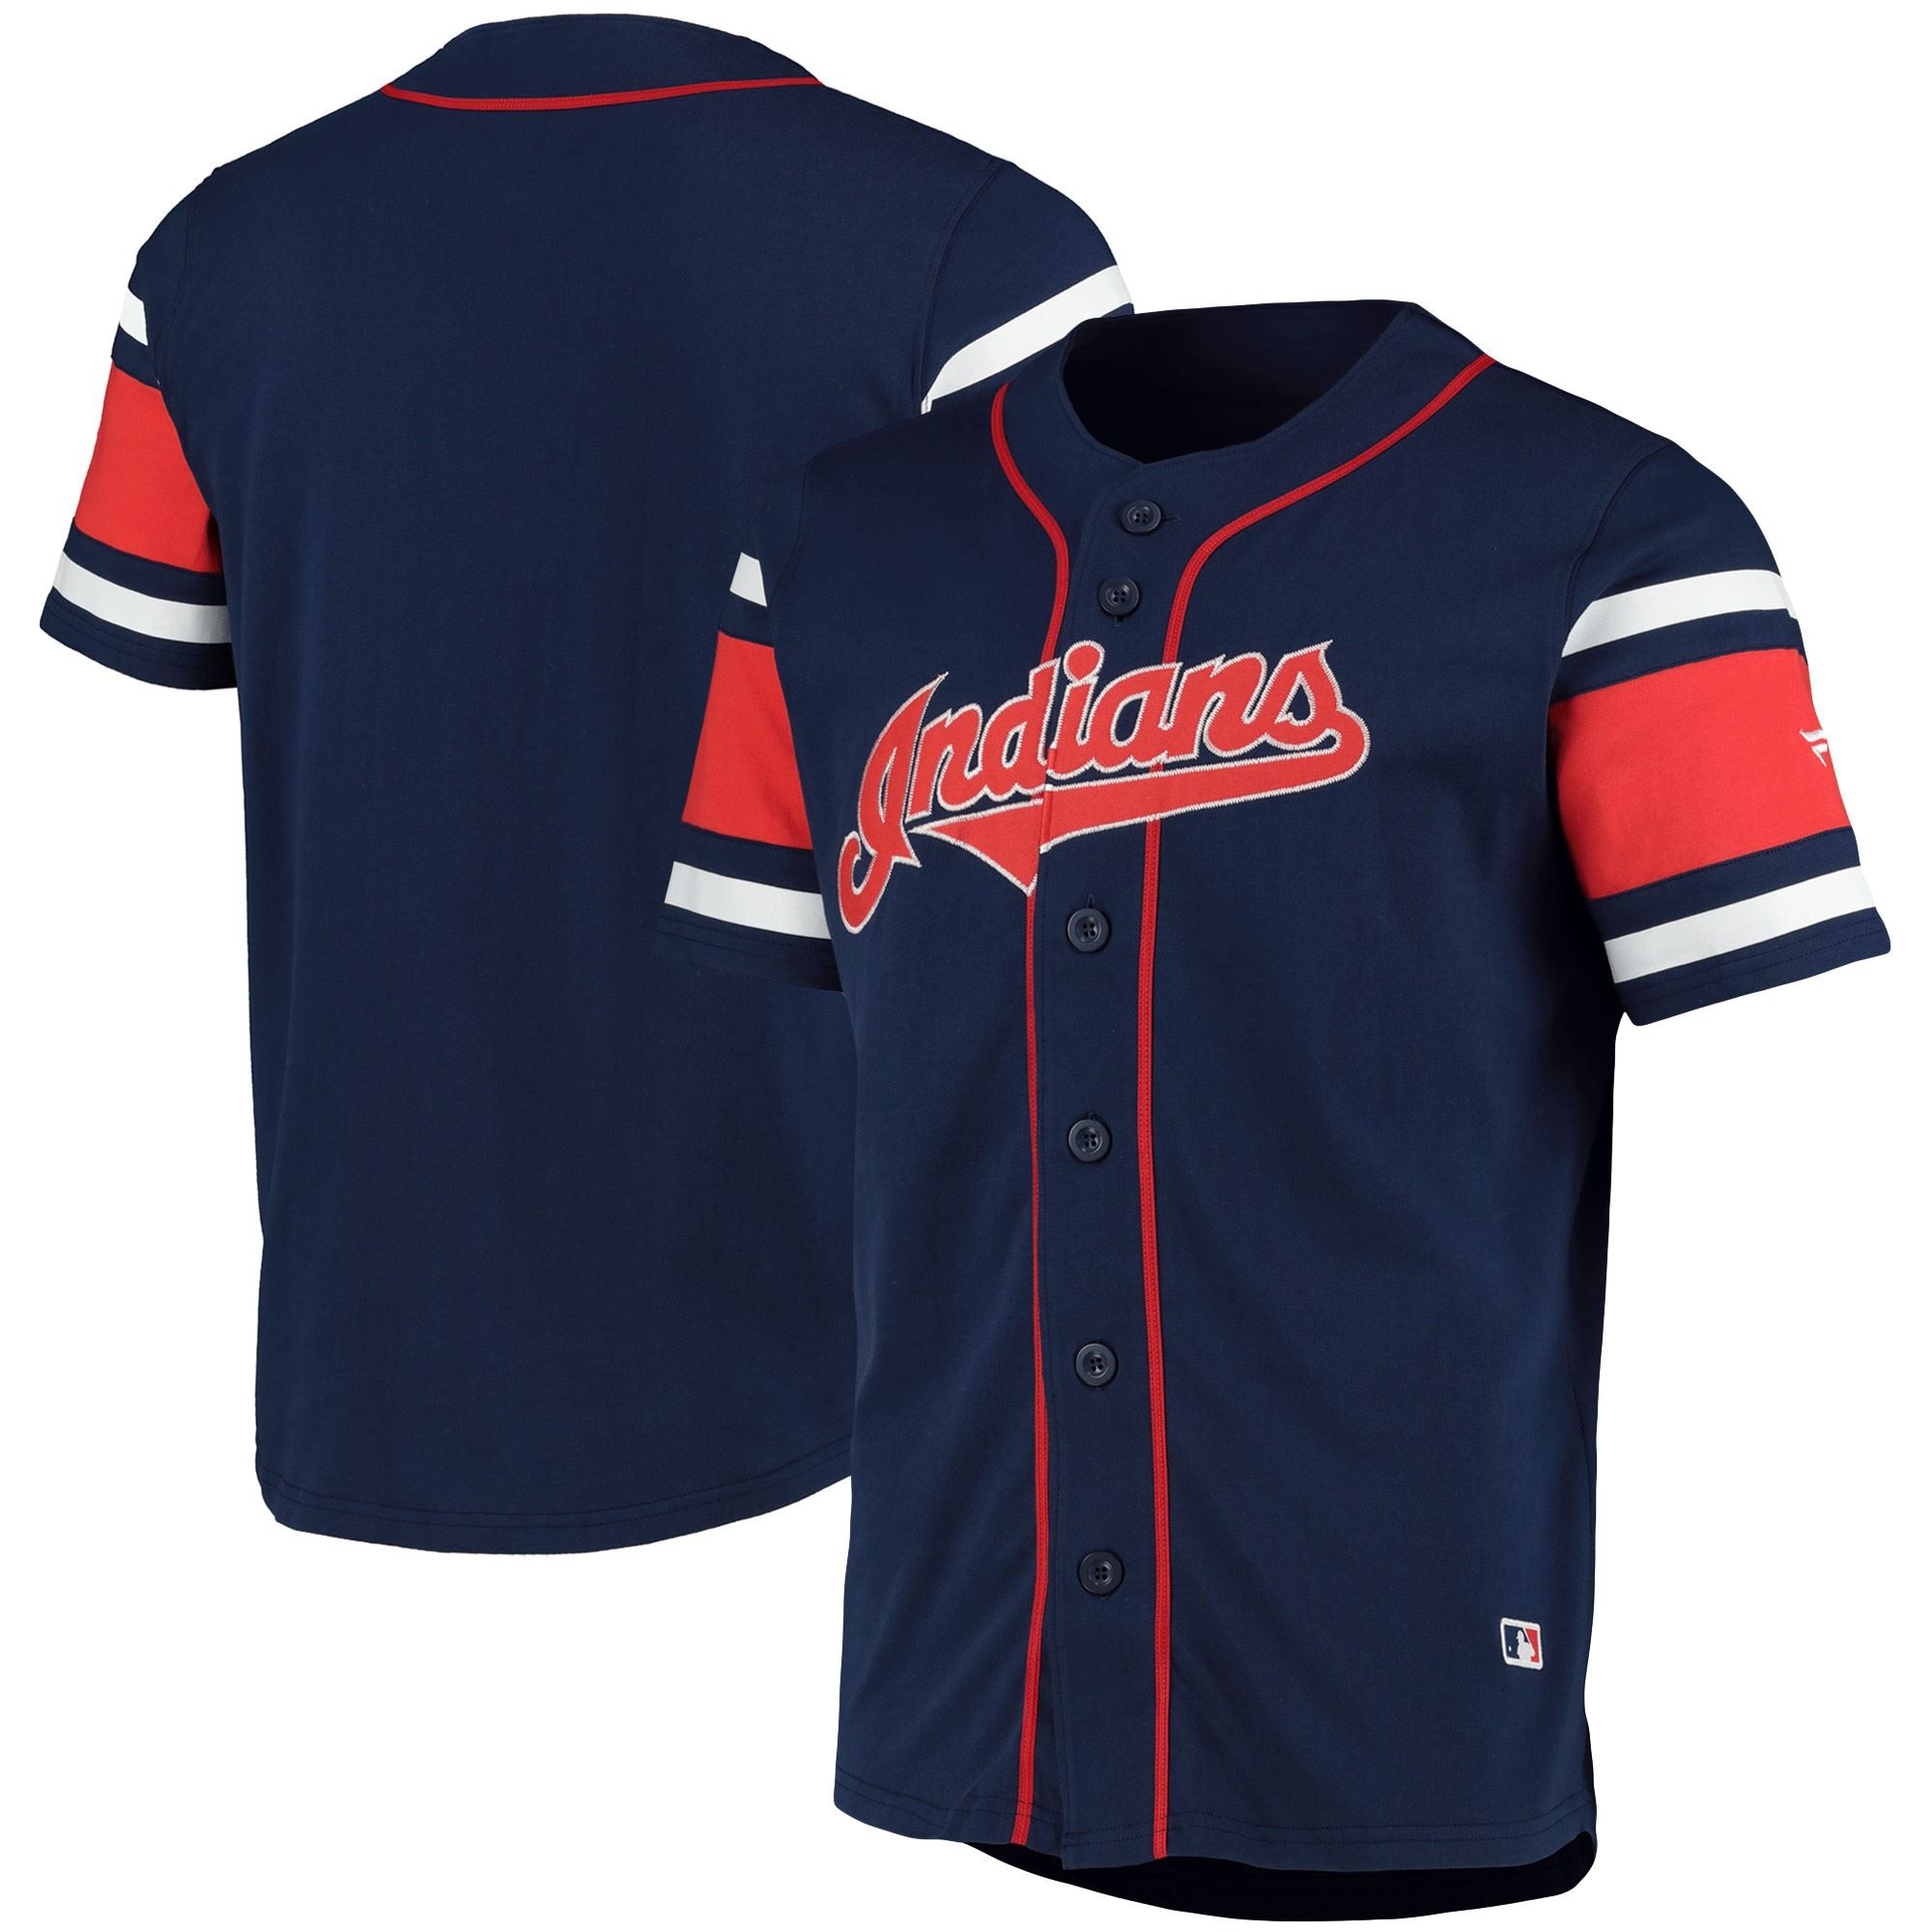 Cleveland Indians MLB Cotton Supporters Jersey Fanatics